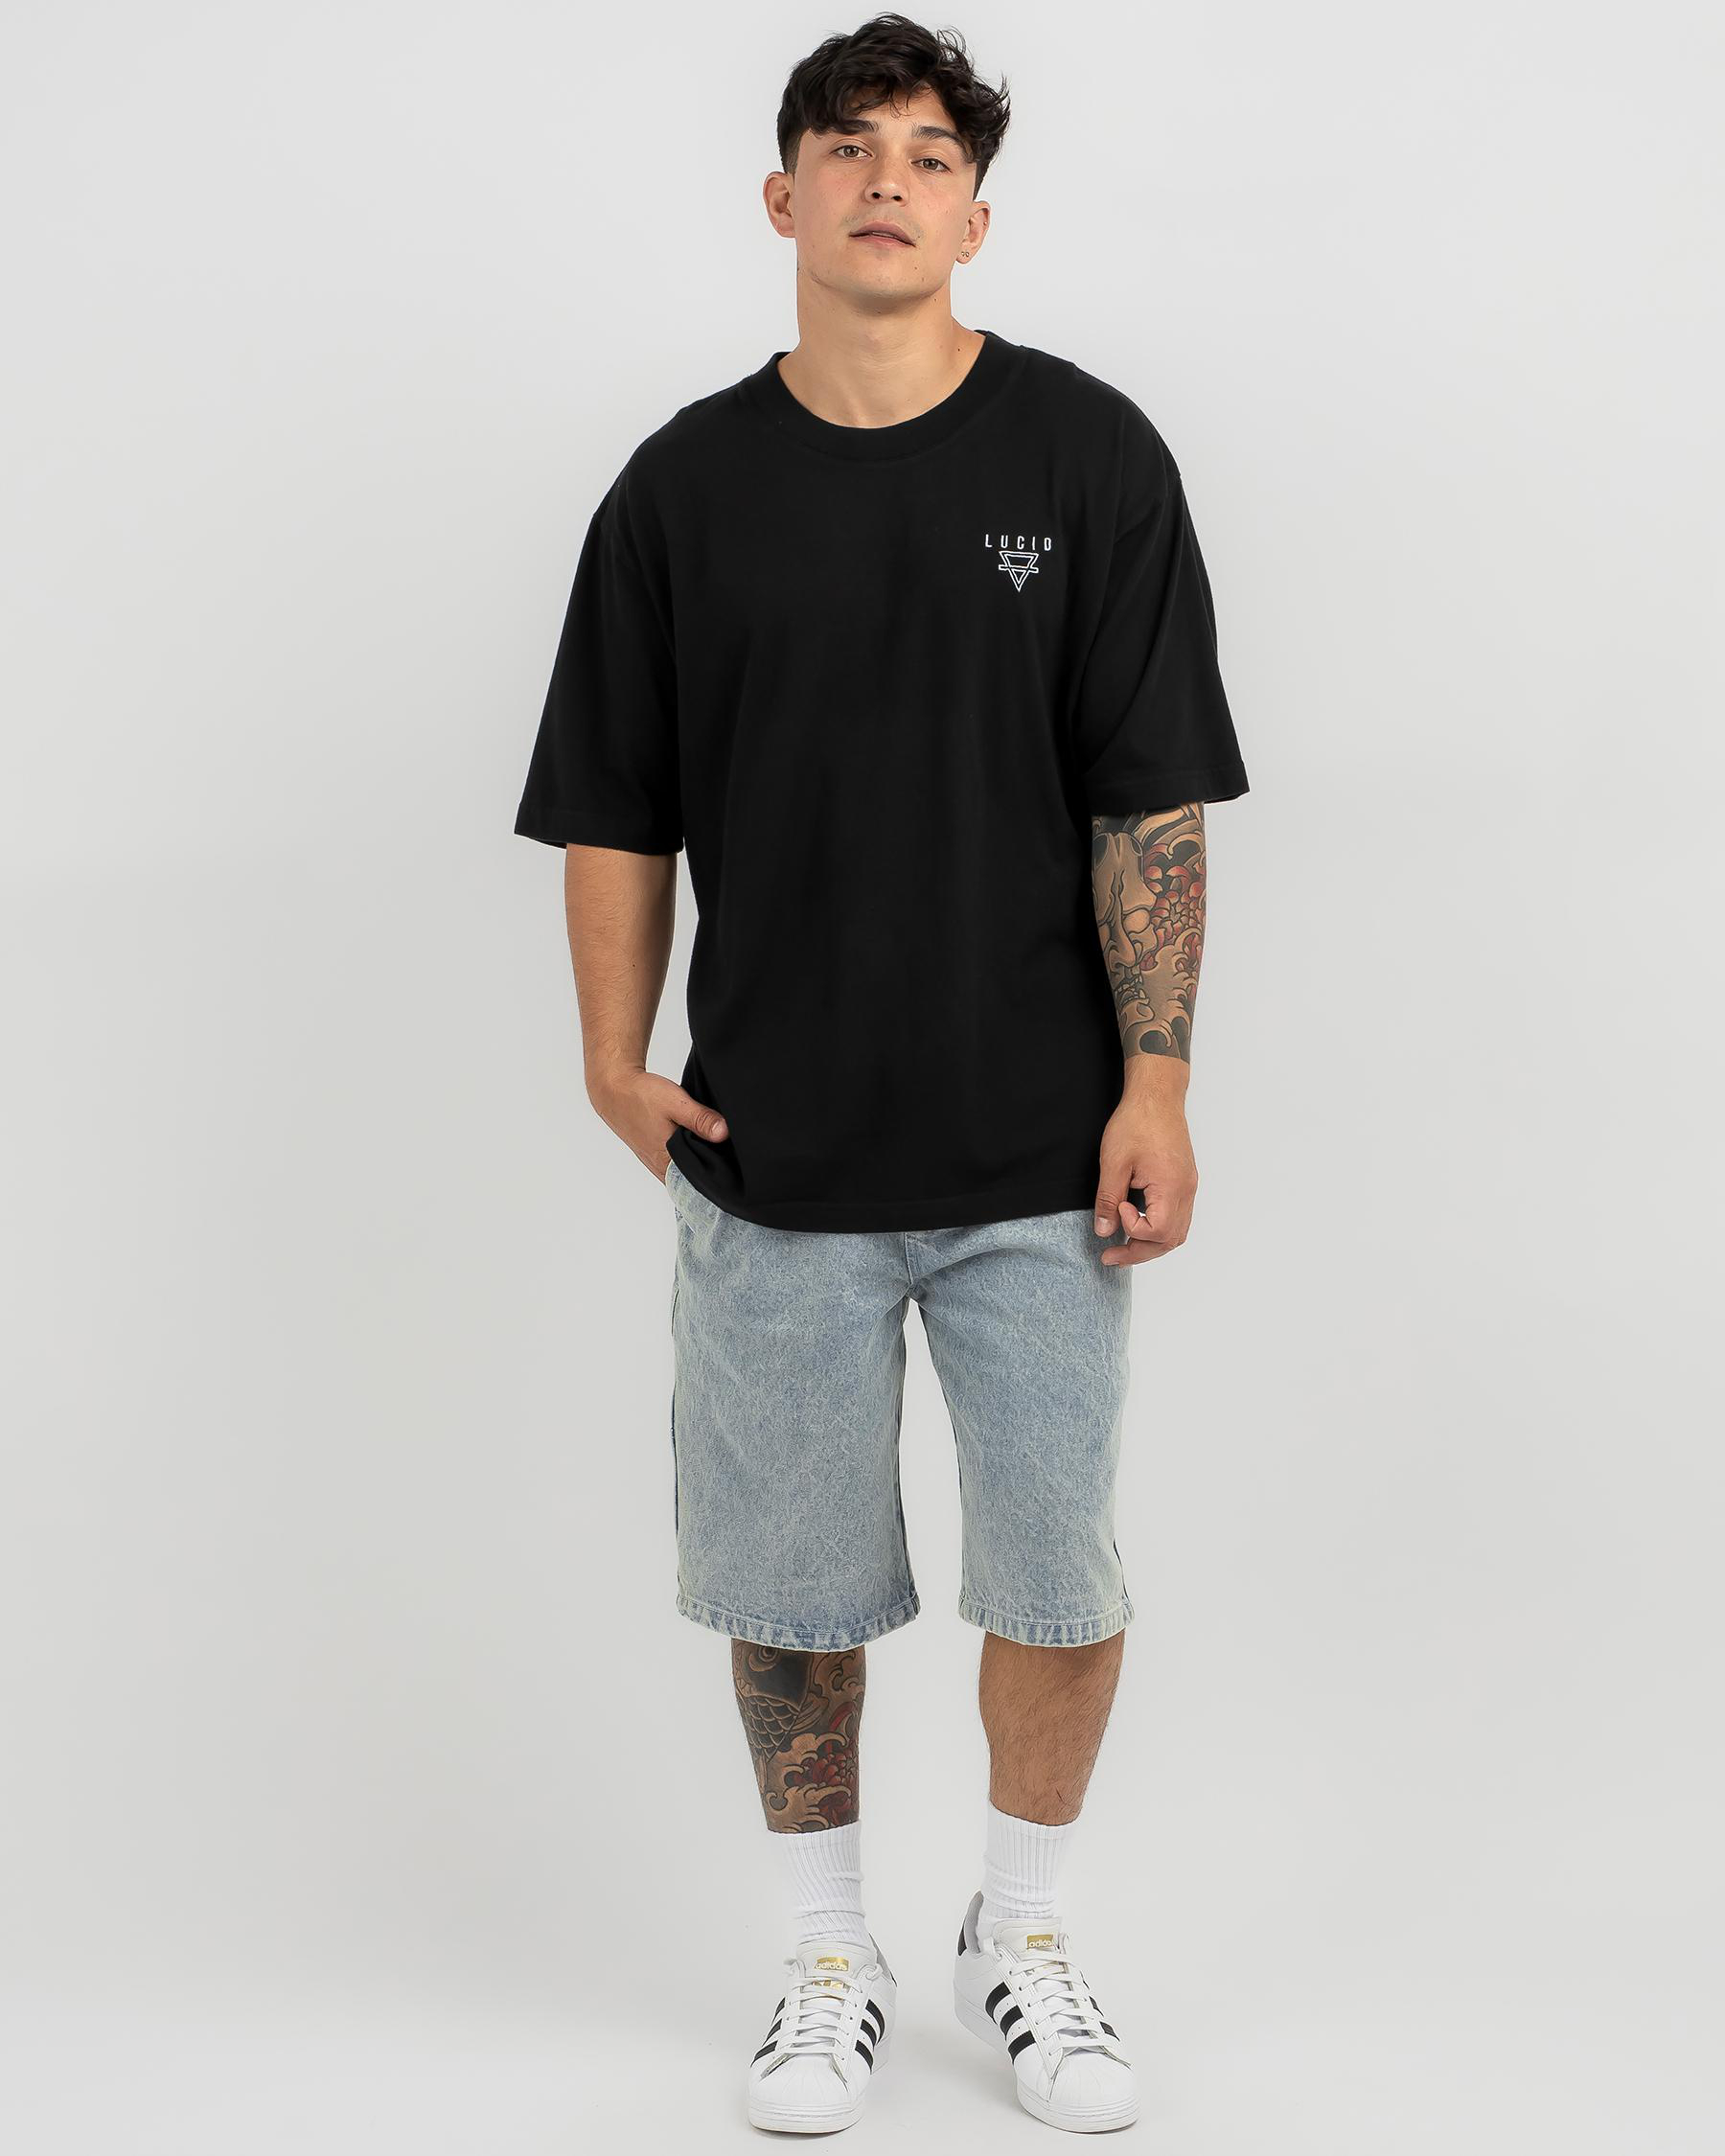 Shop Lucid Framed Box Fit T-Shirt In Black - Fast Shipping & Easy ...